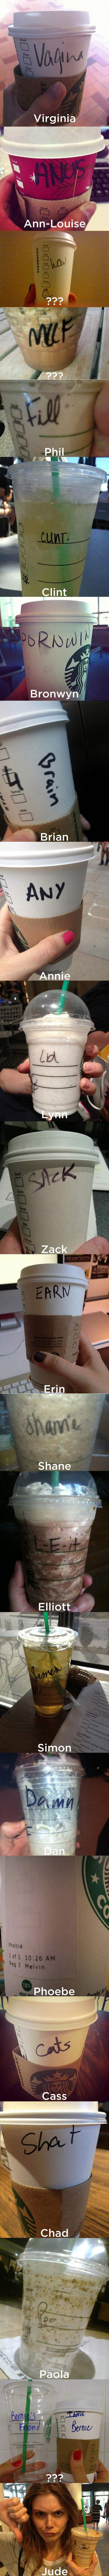 you tried starbucks funny picture